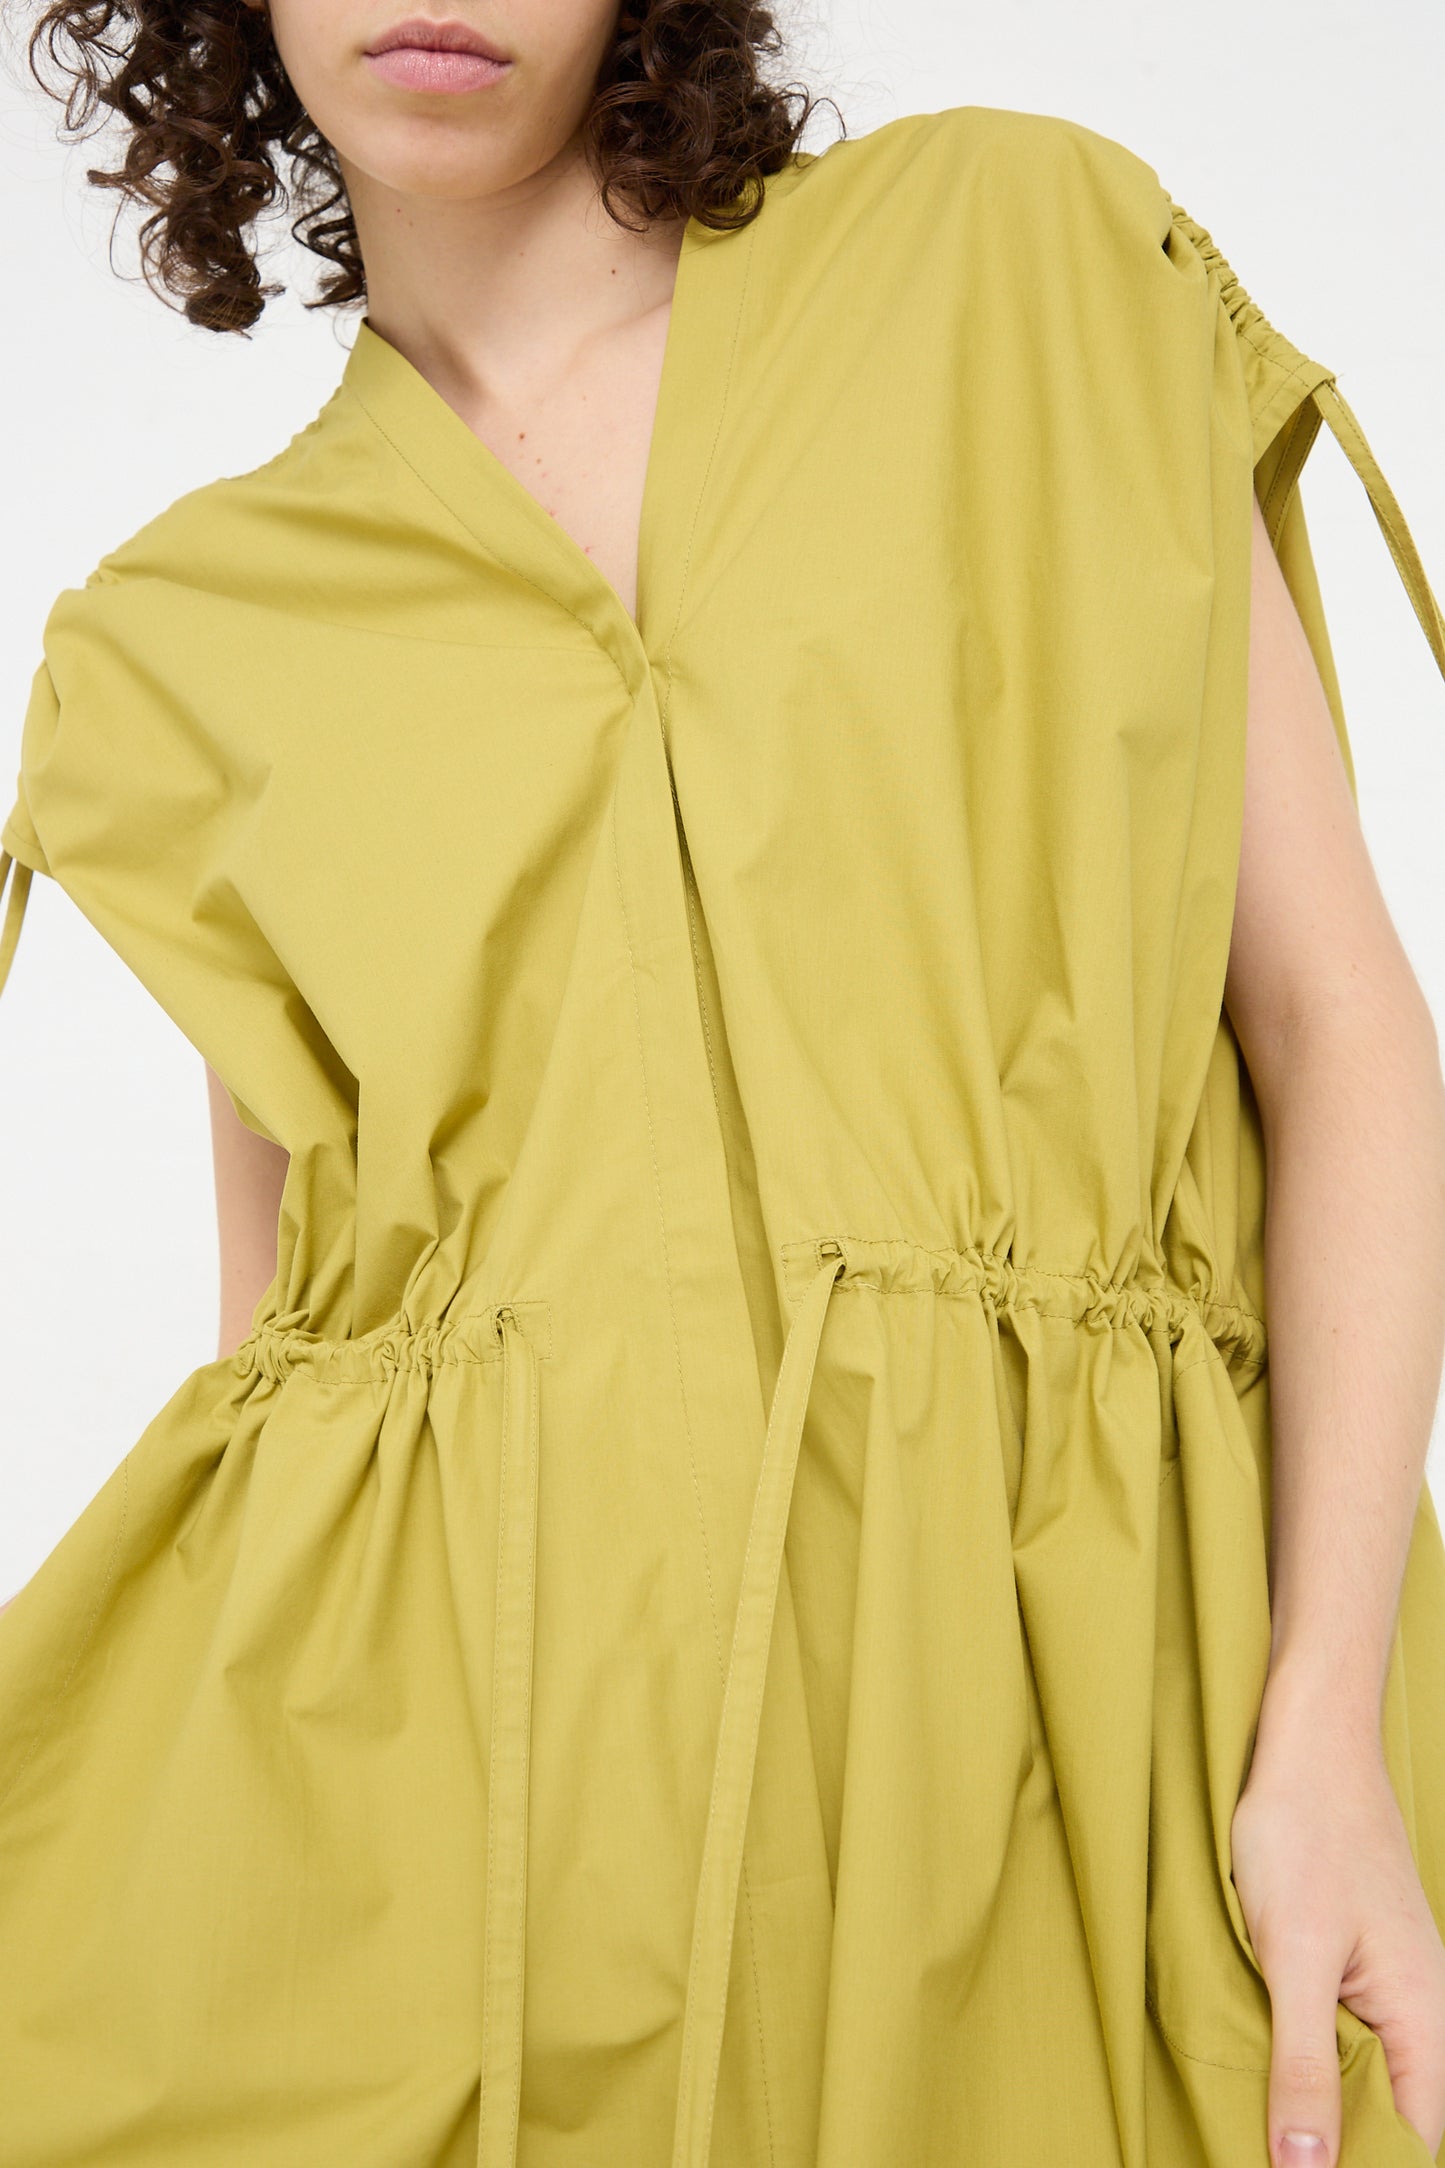 The model is wearing an oversized yellow Veronique Leroy cotton poplin dress with a ruffled sleeve.